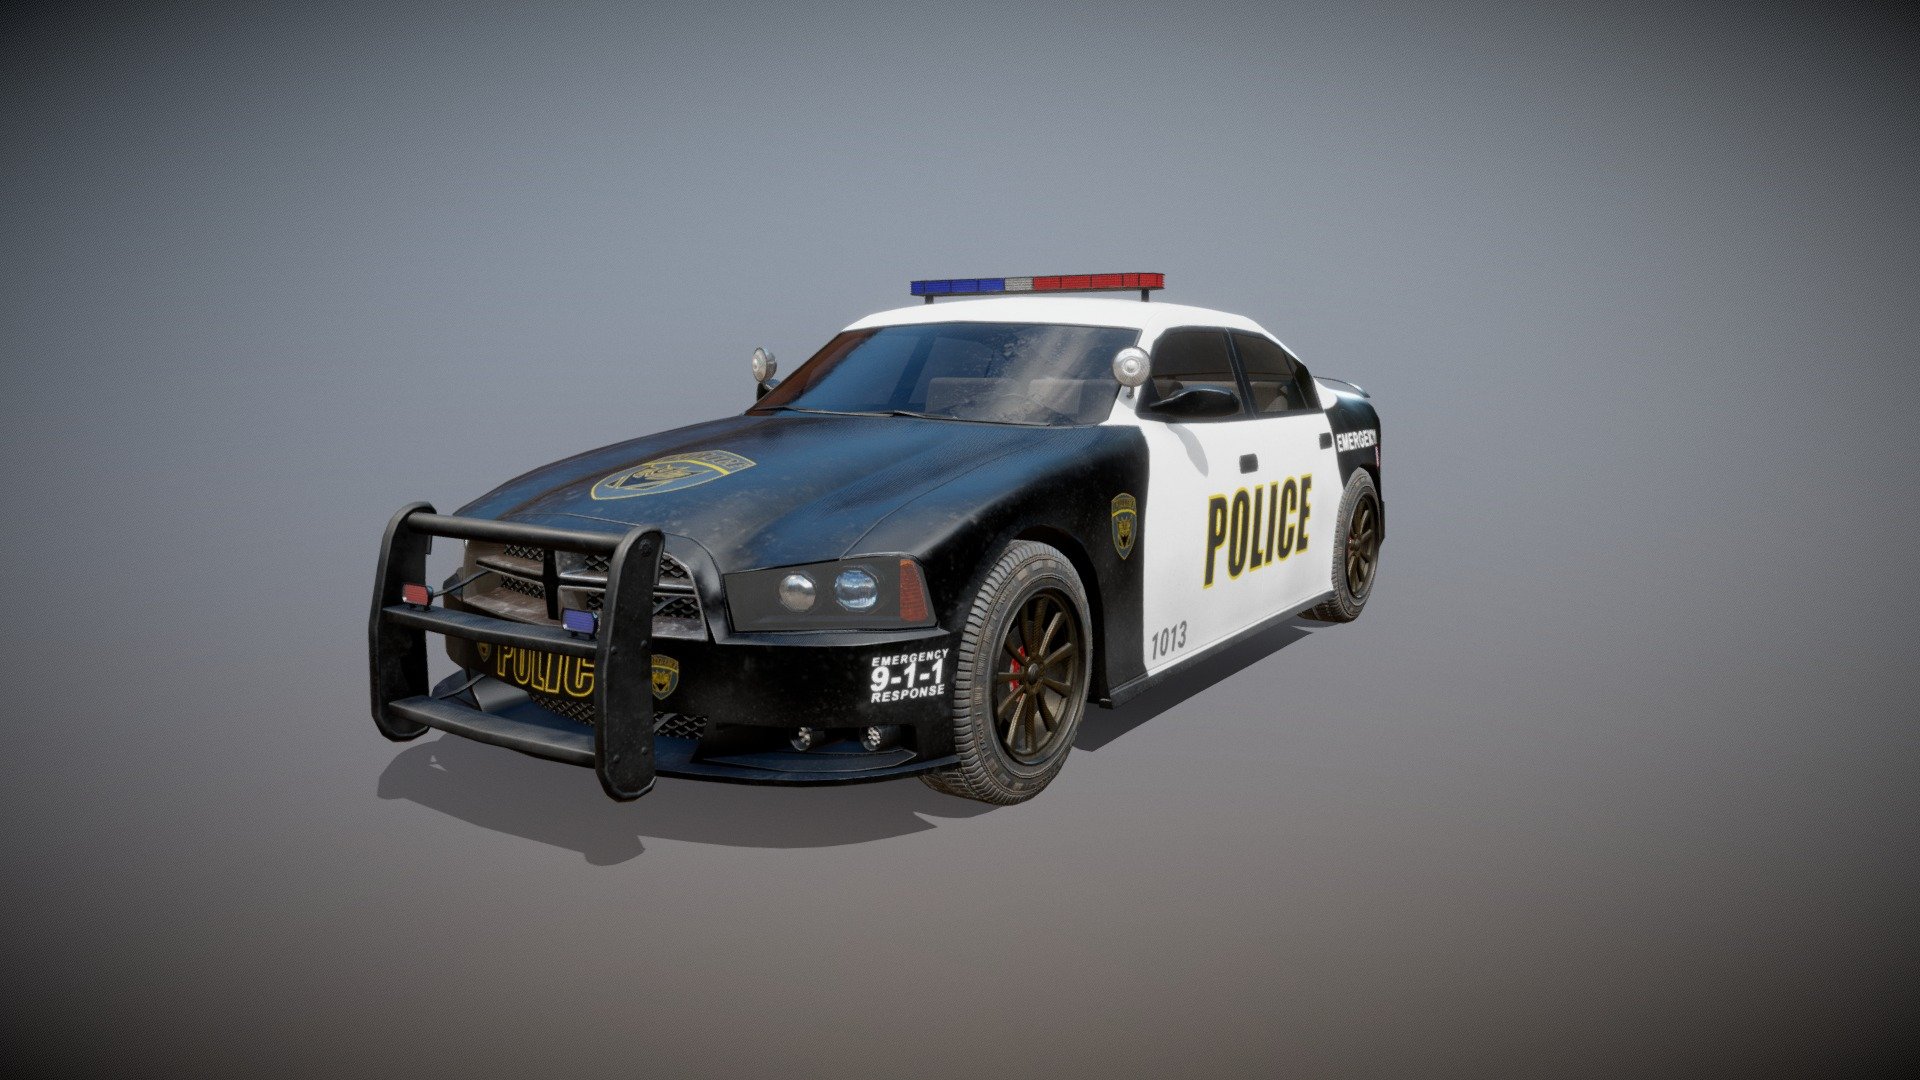 Police car made on blender and textured with substance painter.
Model is inspired from a dodge charger 3d model